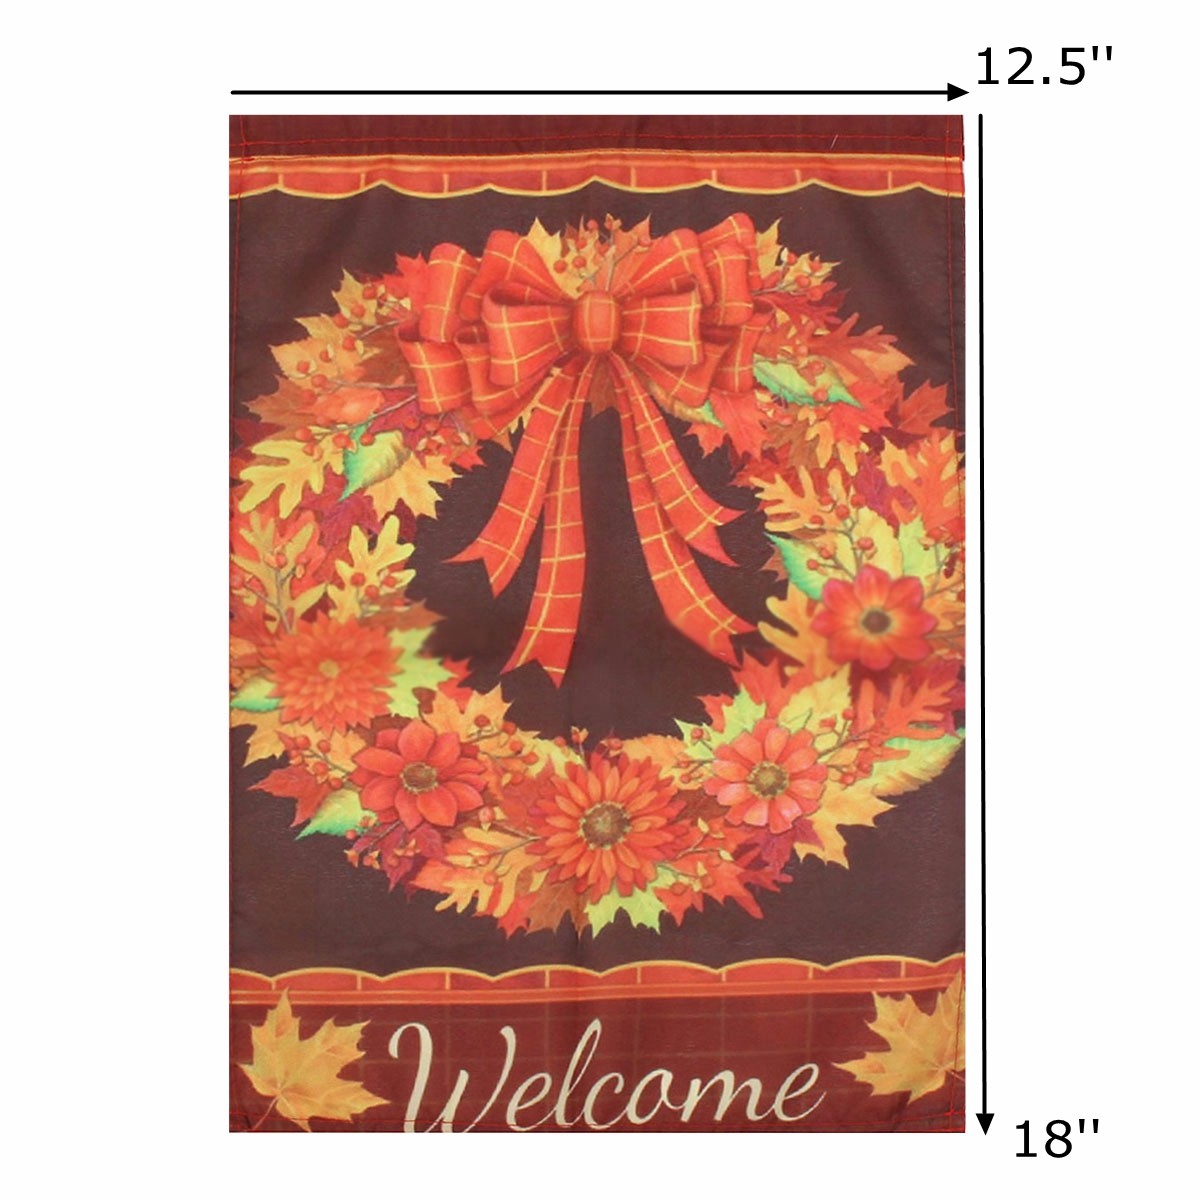 125x18-Fall-Wreath-Garden-Flag-Welcome-Autumn-Leaves-Floral-Briarwood-Lane-Decorations-1343584-7